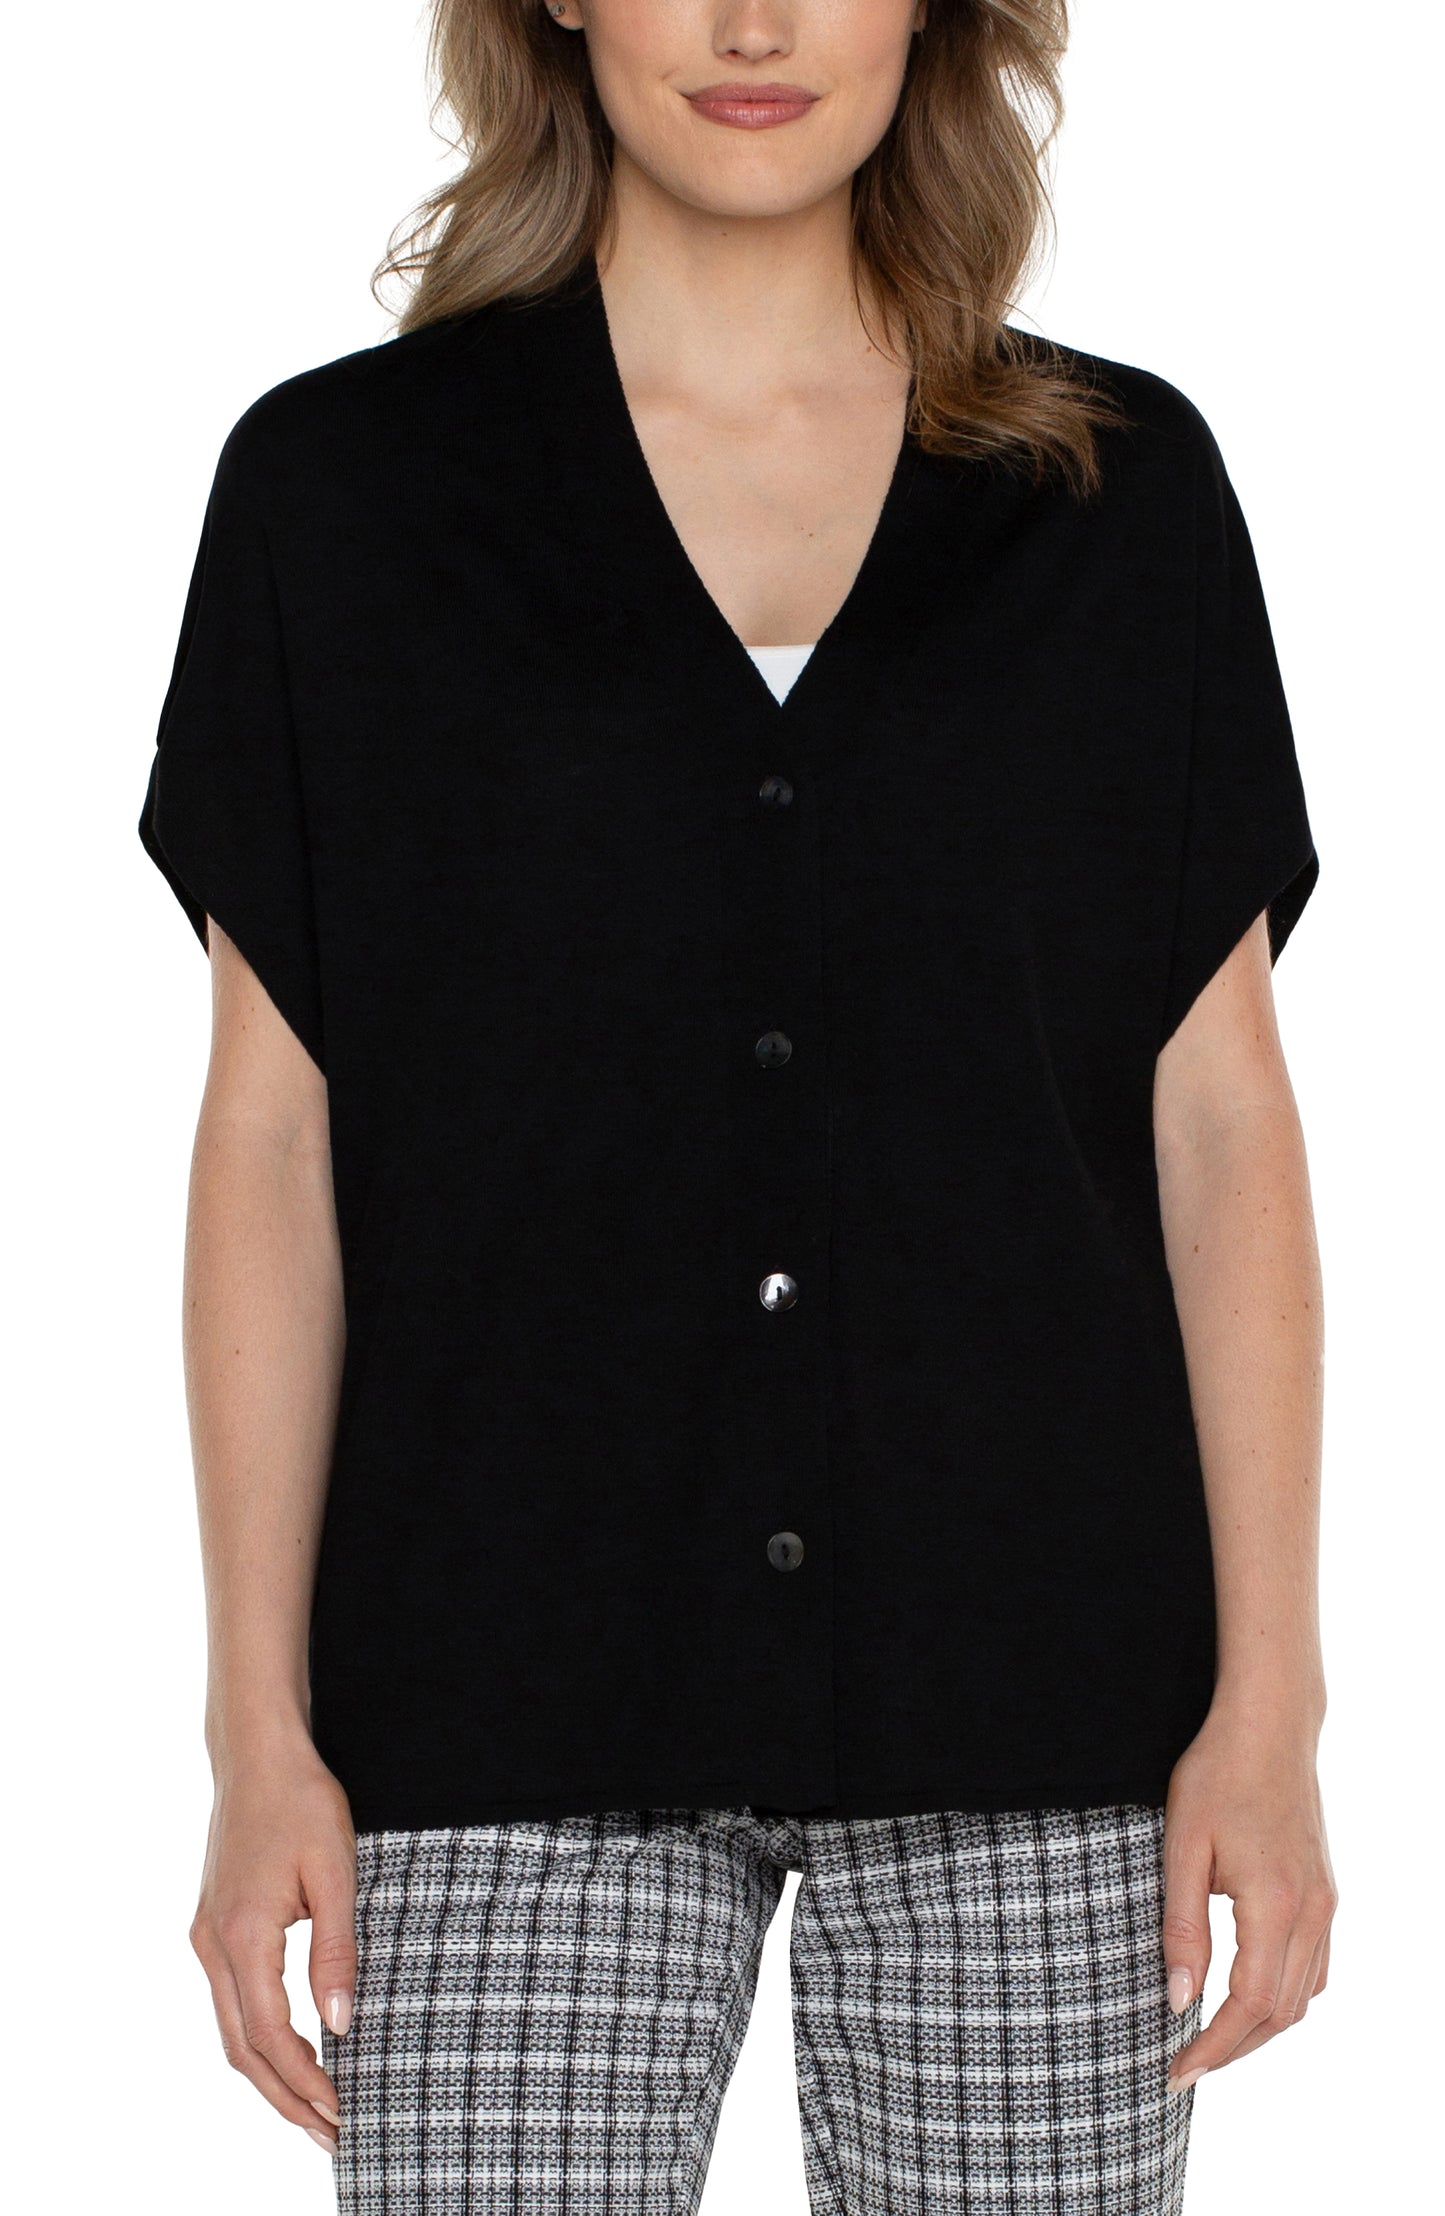 Liverpool Button Front Dolman Cardigan Sweater (black)